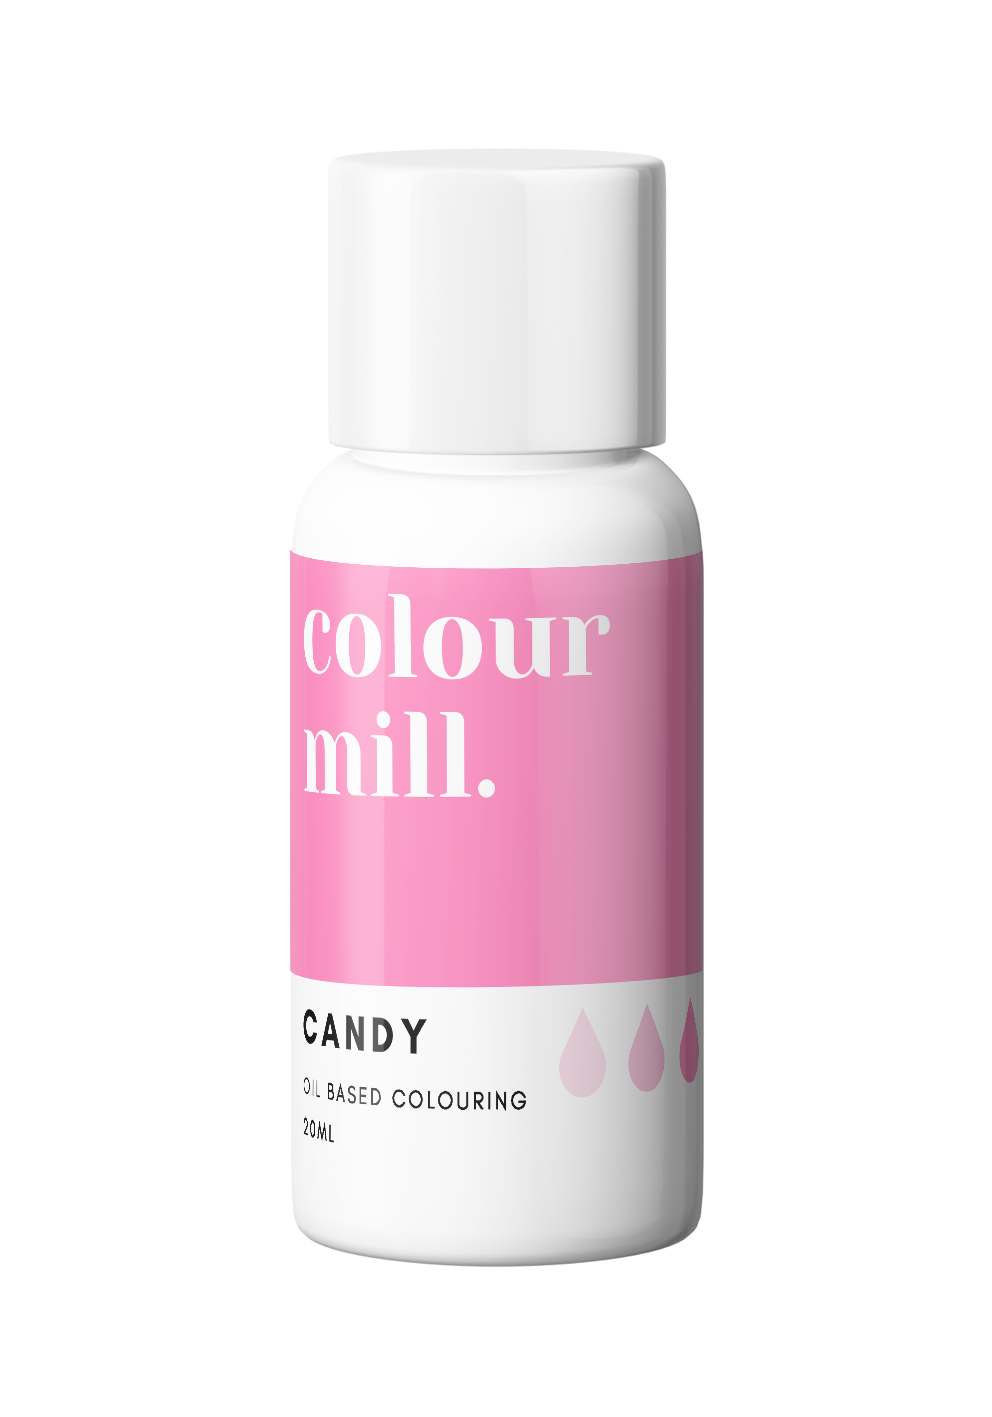 Colour Mill Candy